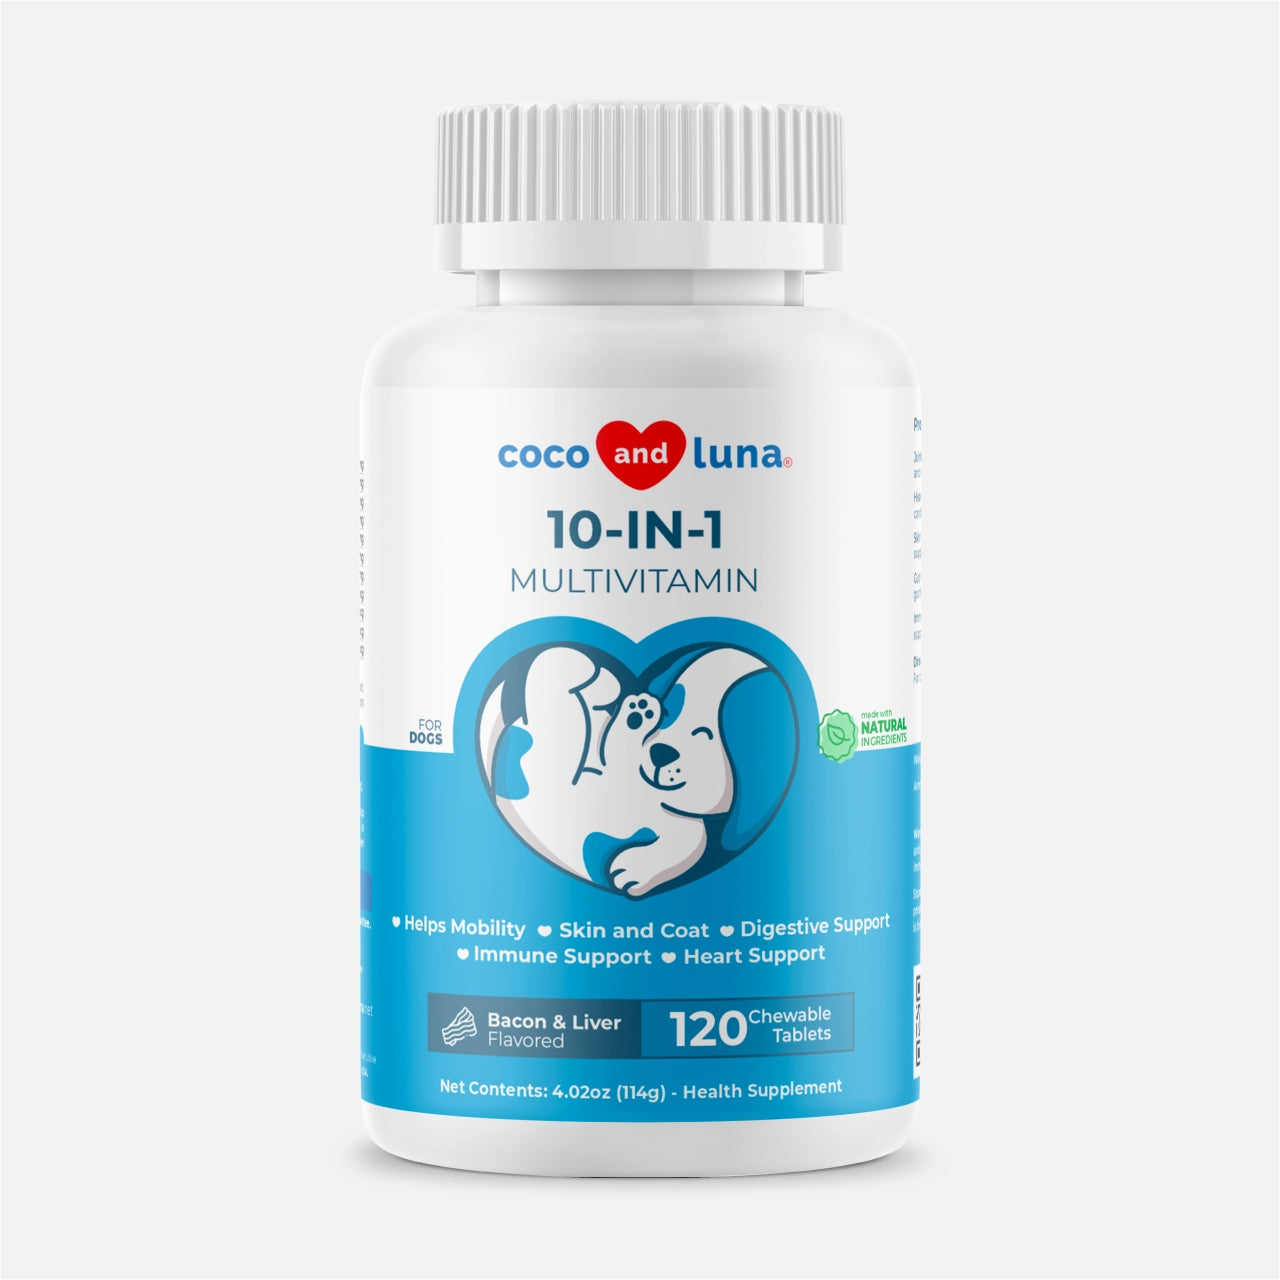 10 in 1 Multivitamin for Dogs - 120 Chewable Tablets - Coco and Luna